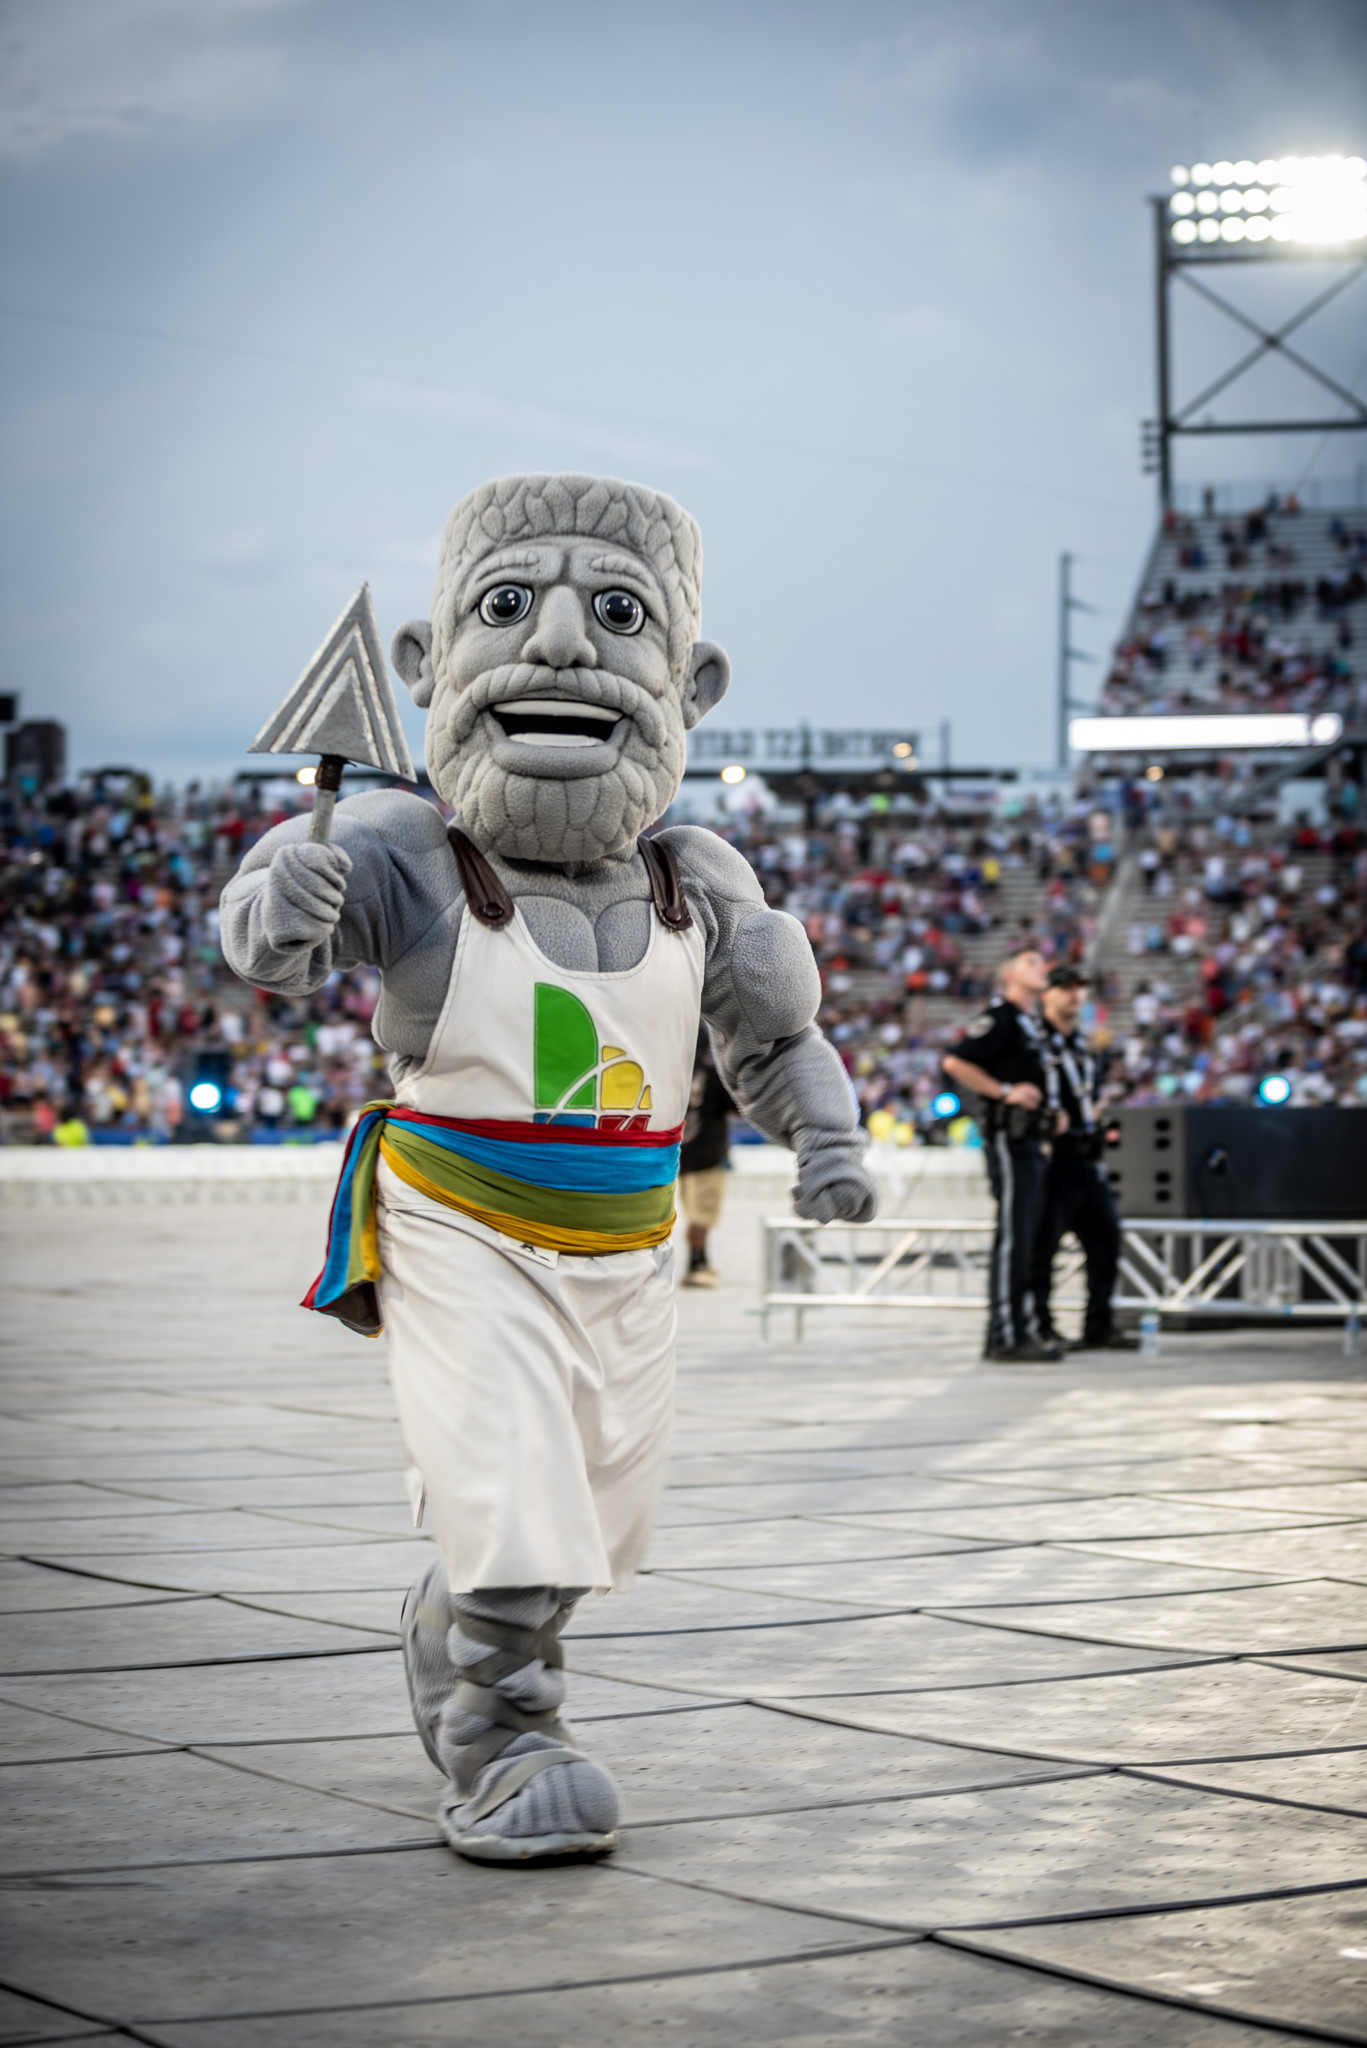 The Games' mascots, Vulcan and Vesta, made an appearance after they were selected due to their symbolism of Birmingham's history of iron and steel production ©The World Games